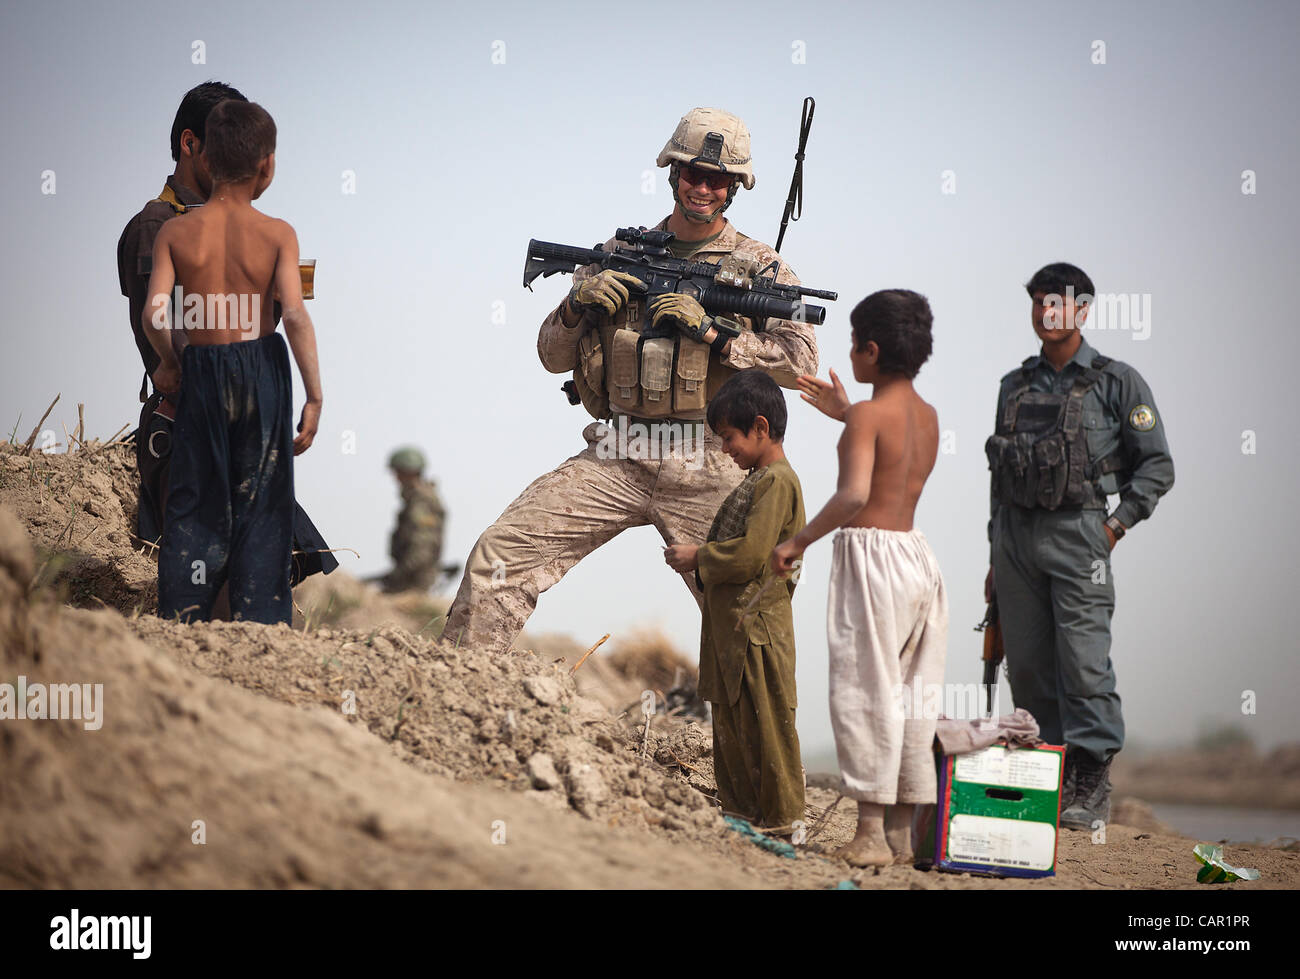 U.S. Marine Cpl. Mark Jensen (center), a team leader with 4th Platoon, Kilo Company, 3rd Battalion, 3rd Marine Regiment, and 22-year-old native of Nyssa, Ore., talks with Afghan National Police patrolmen and local children while providing security at a vehicle checkpoint. Stock Photo